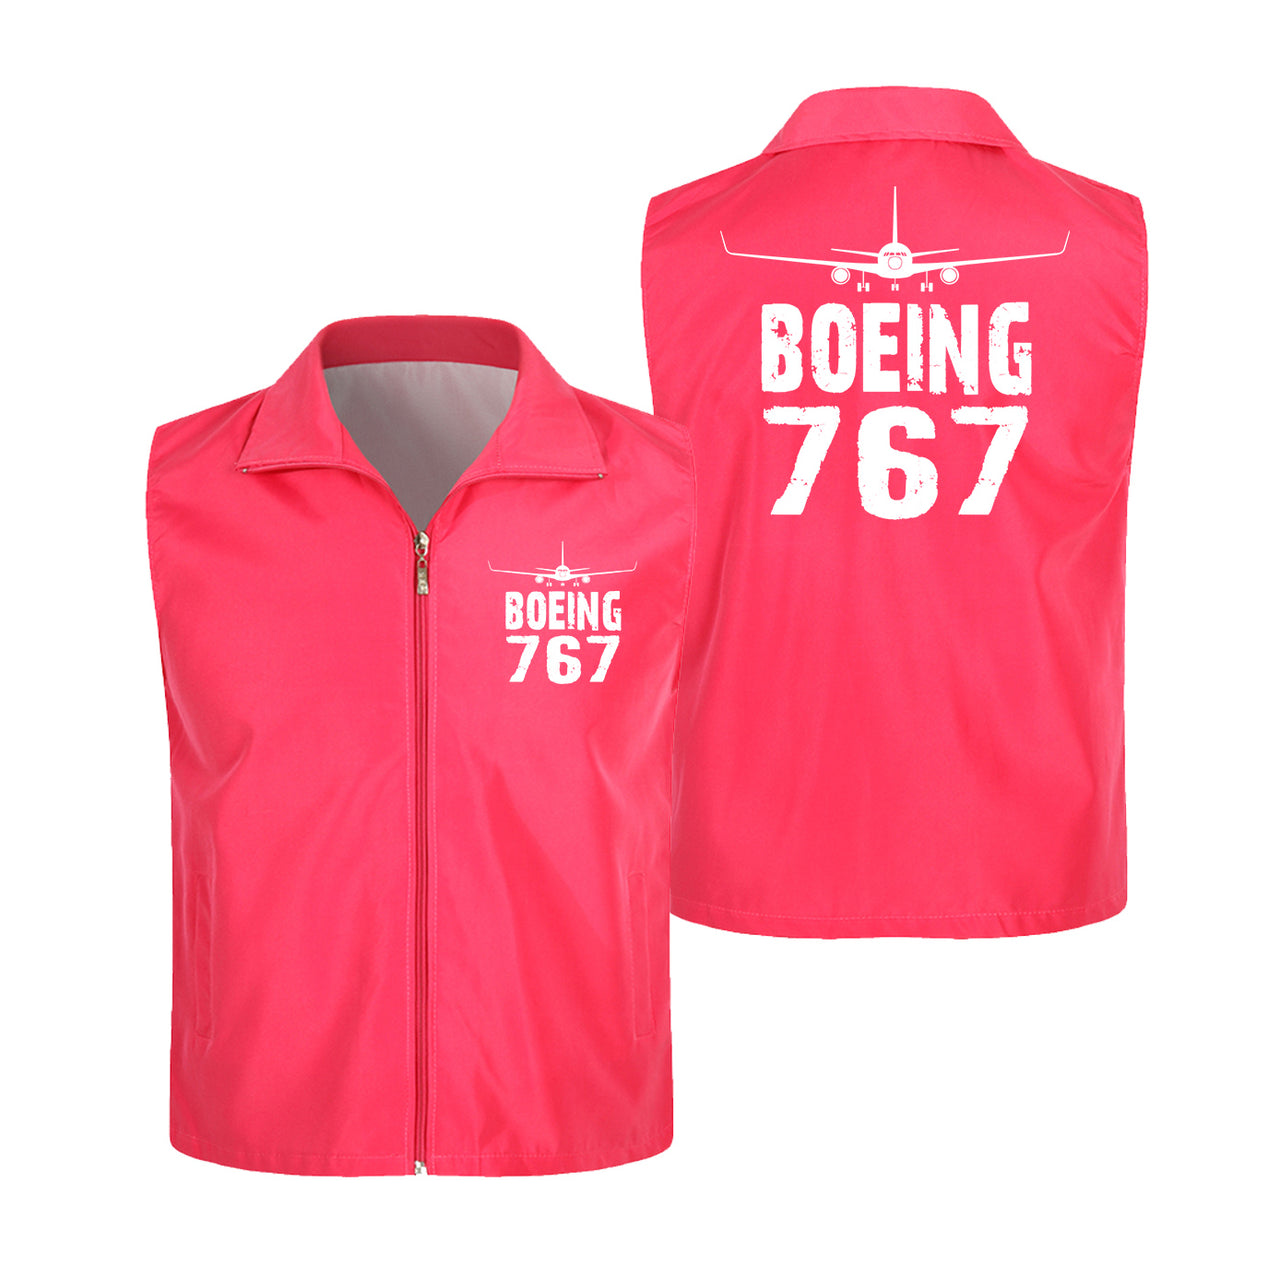 Boeing 767 & Plane Designed Thin Style Vests